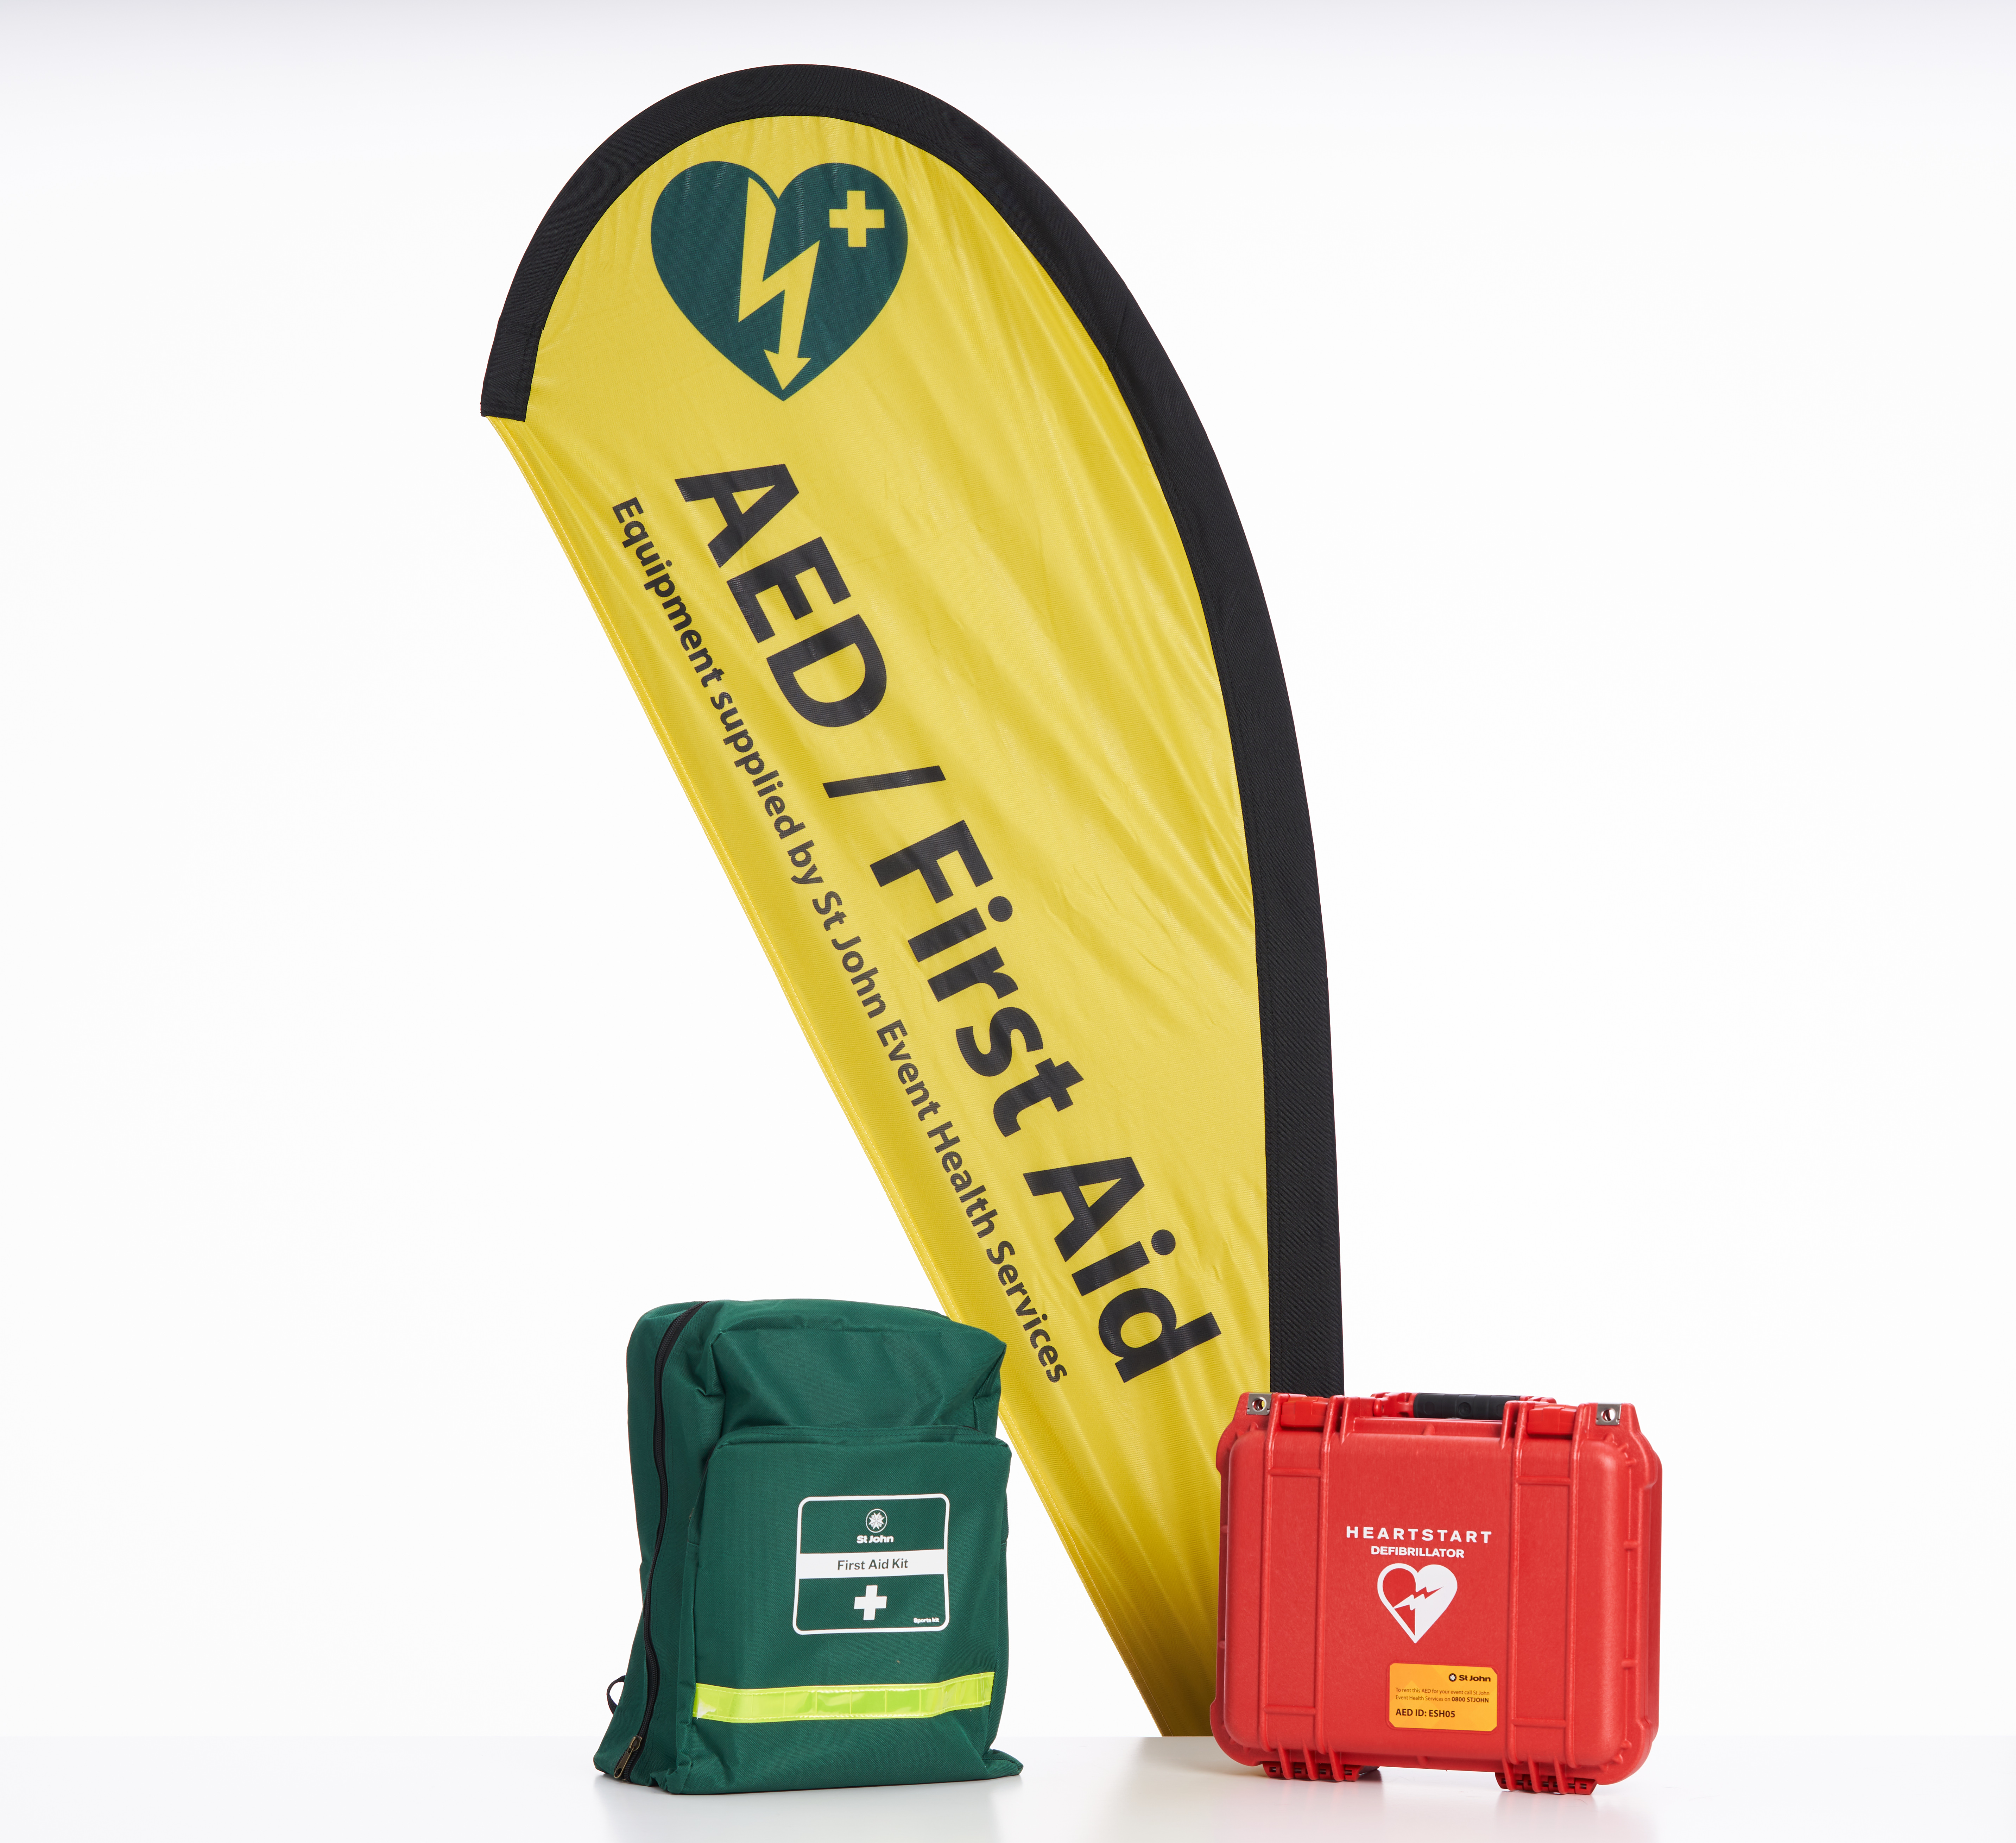 AED rental options from Hato Hone St John